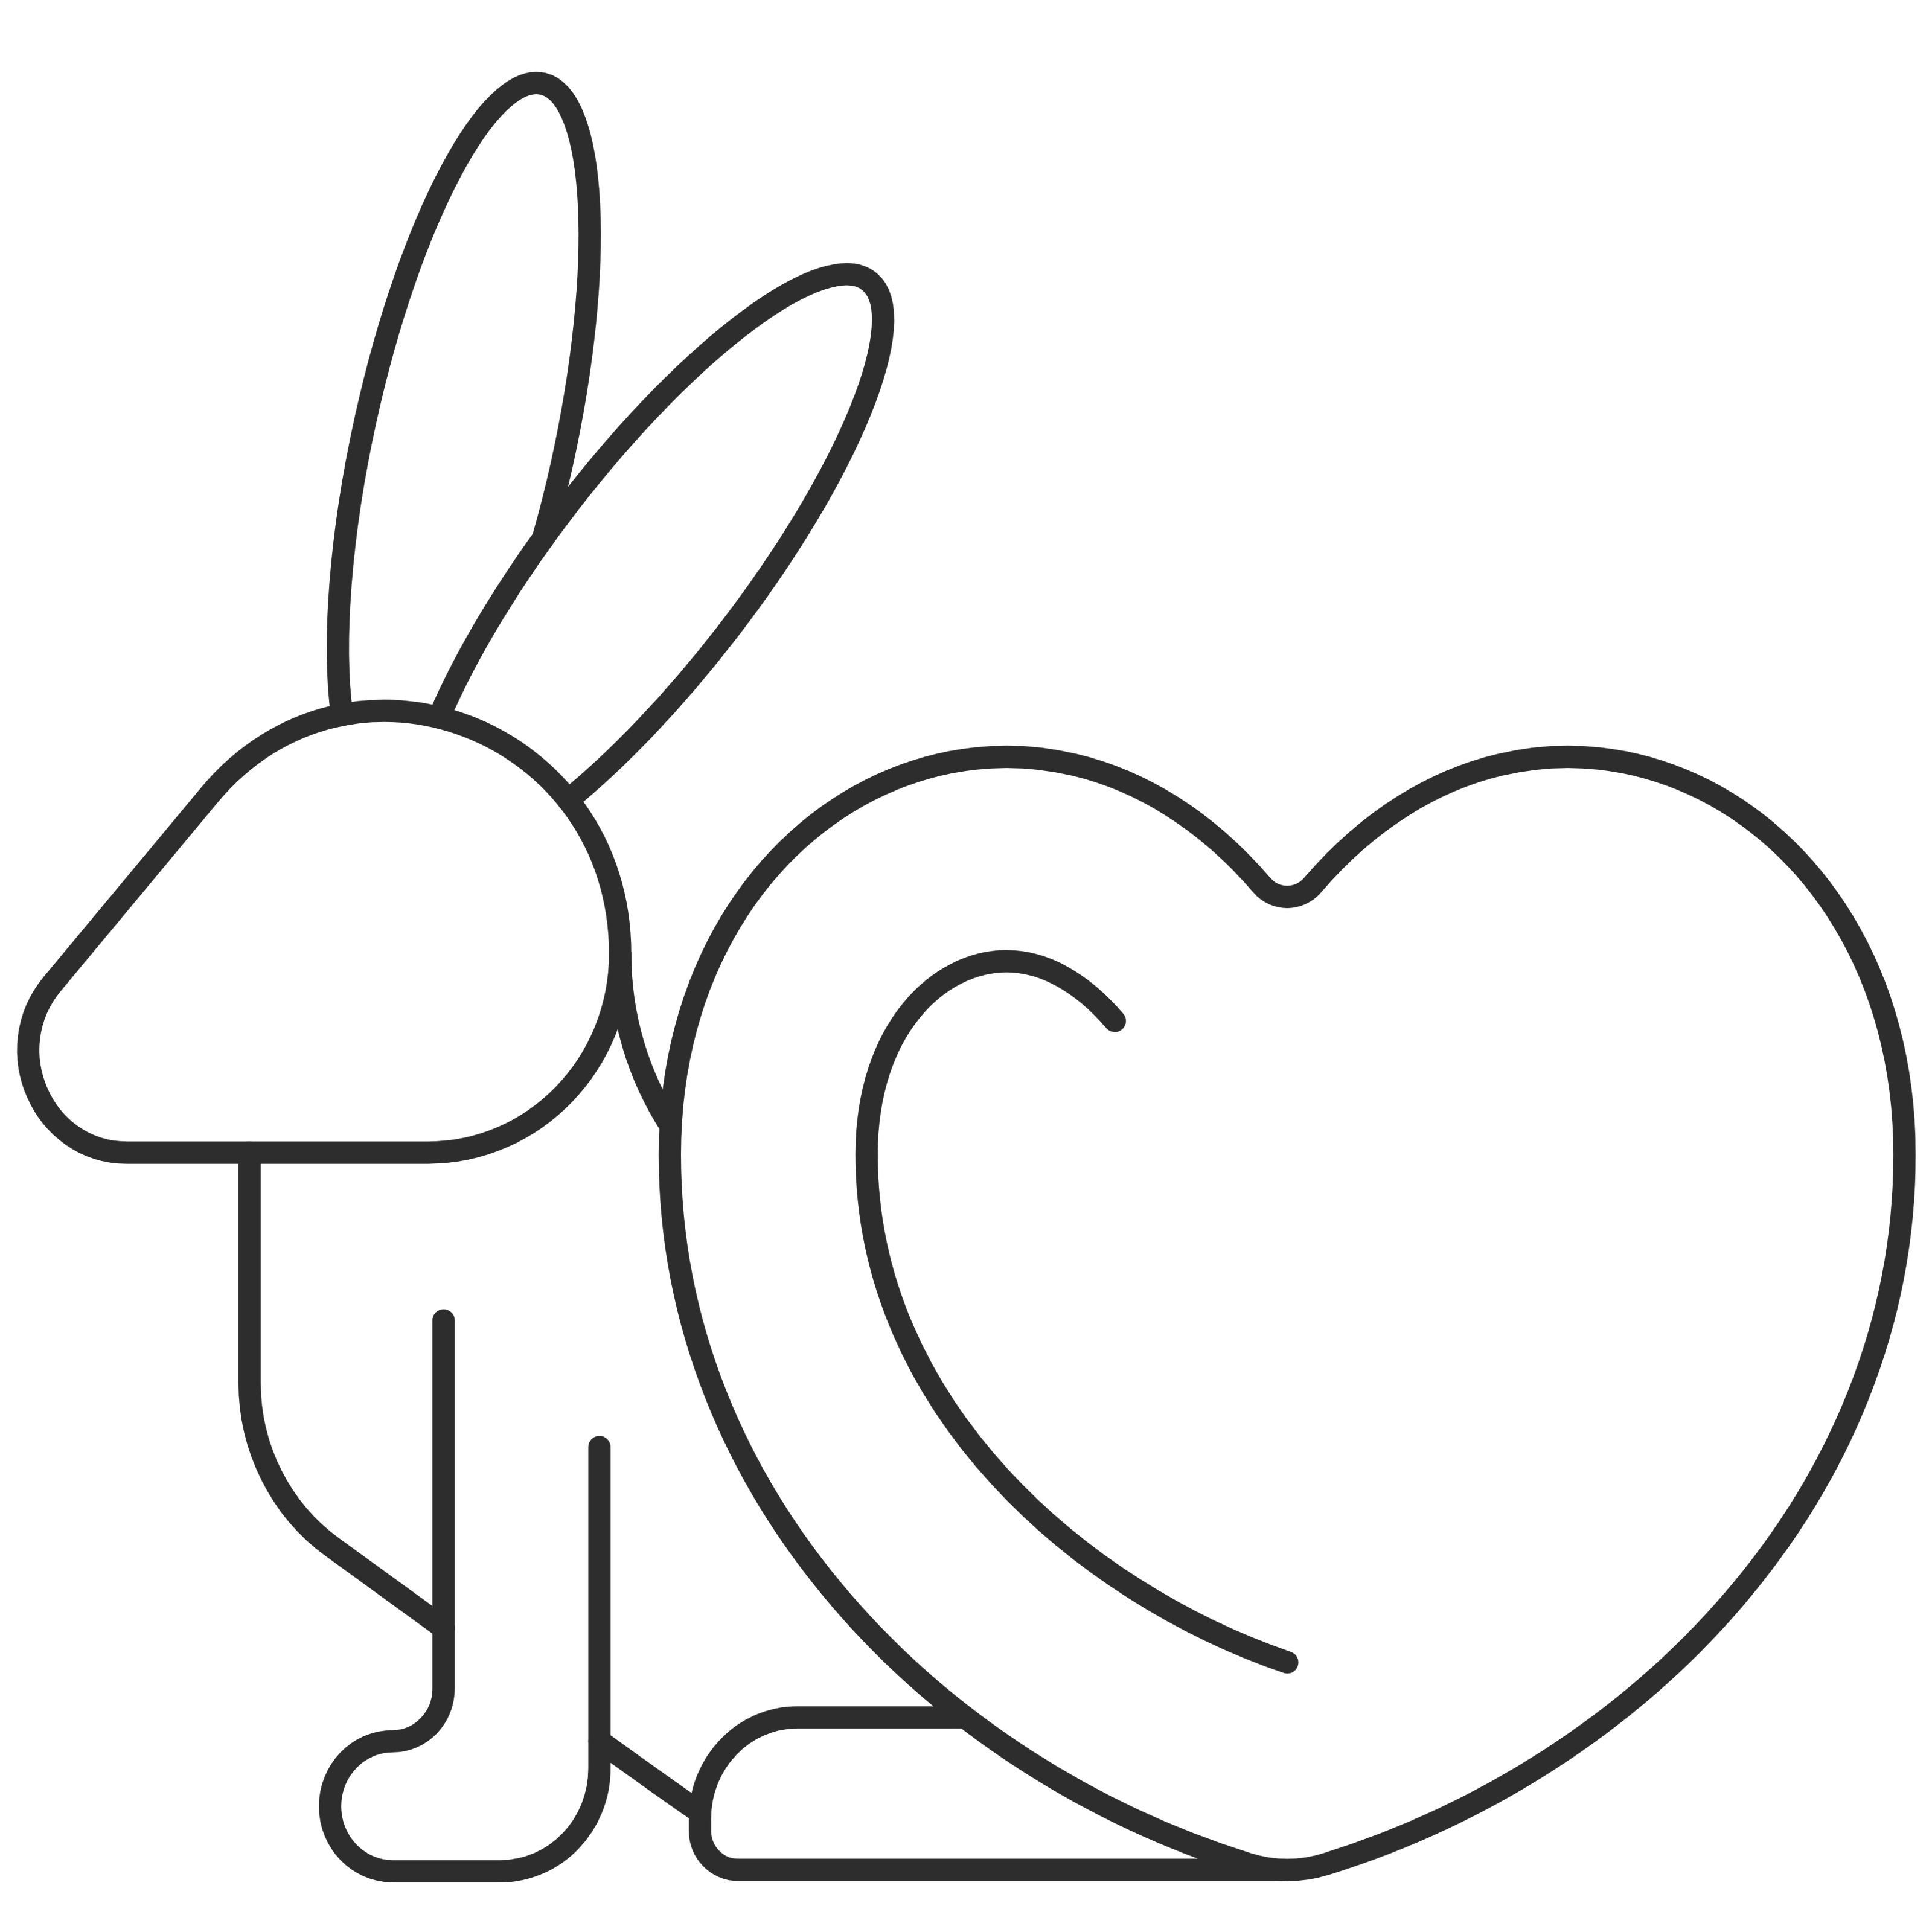 Bunny and heart. Vegan and cruelty-free.